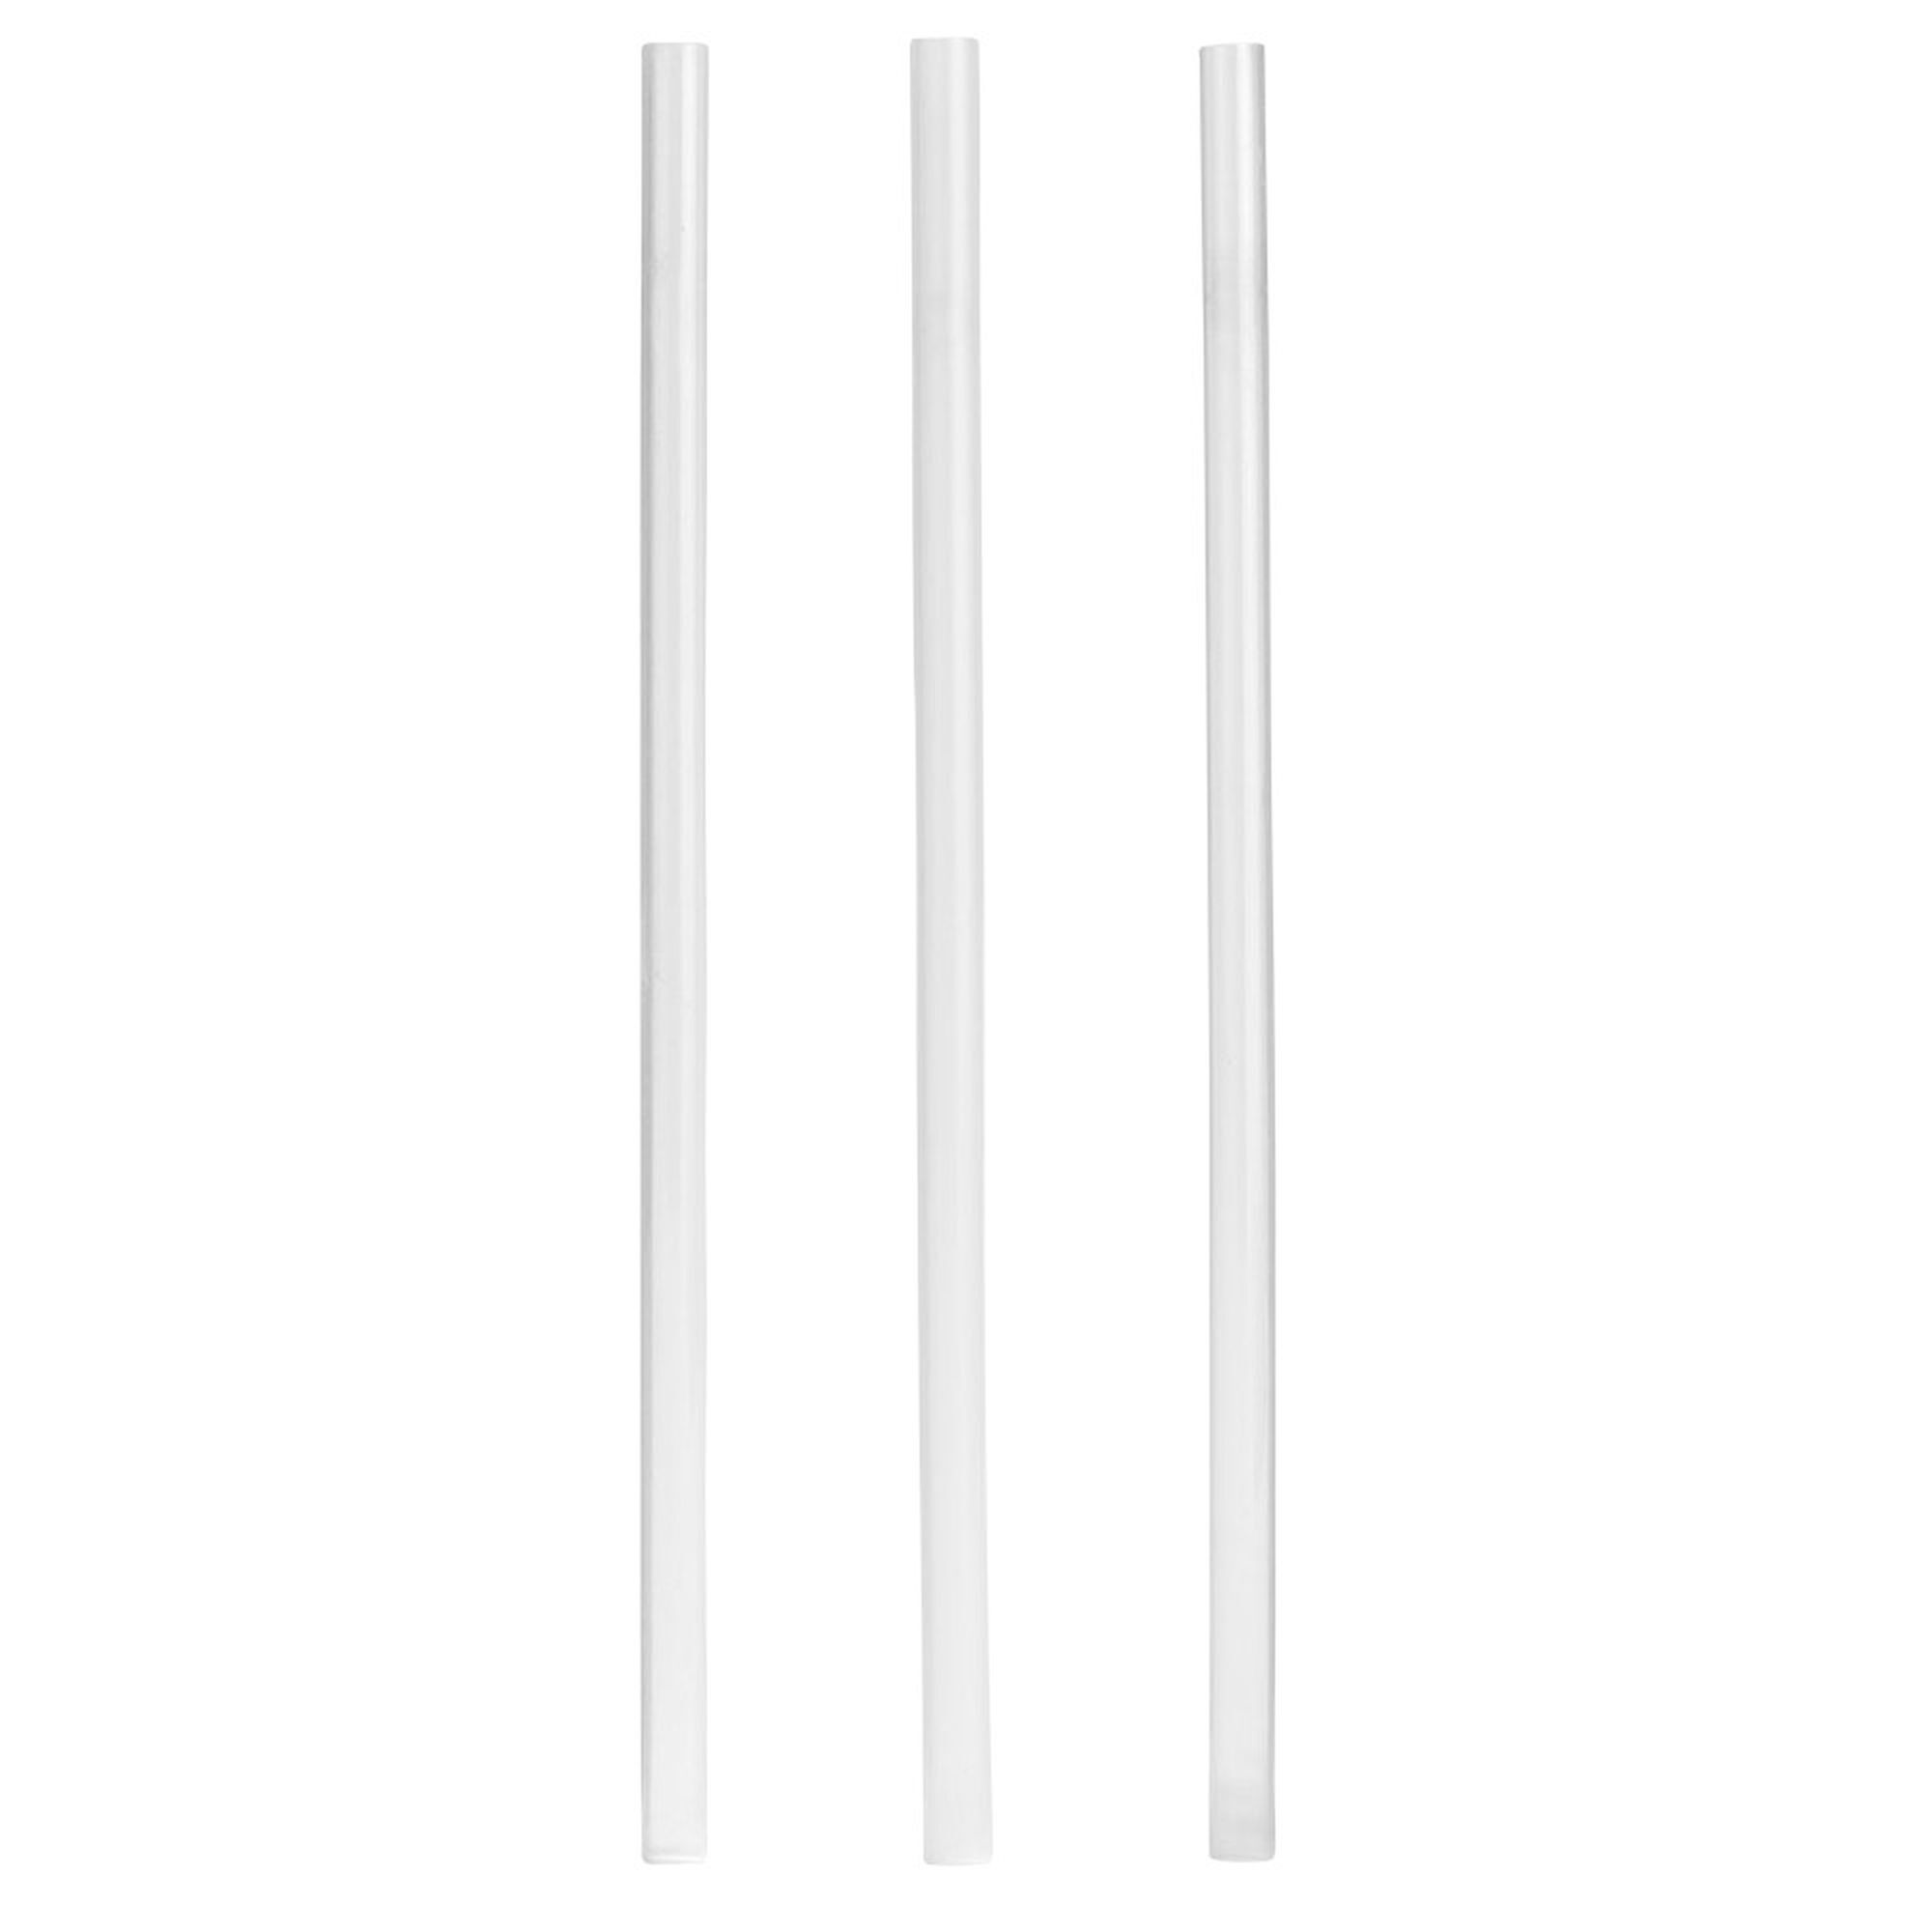 Hydro Flask 3-Pack Replacement Straws - Trinkhalme | Hardloop